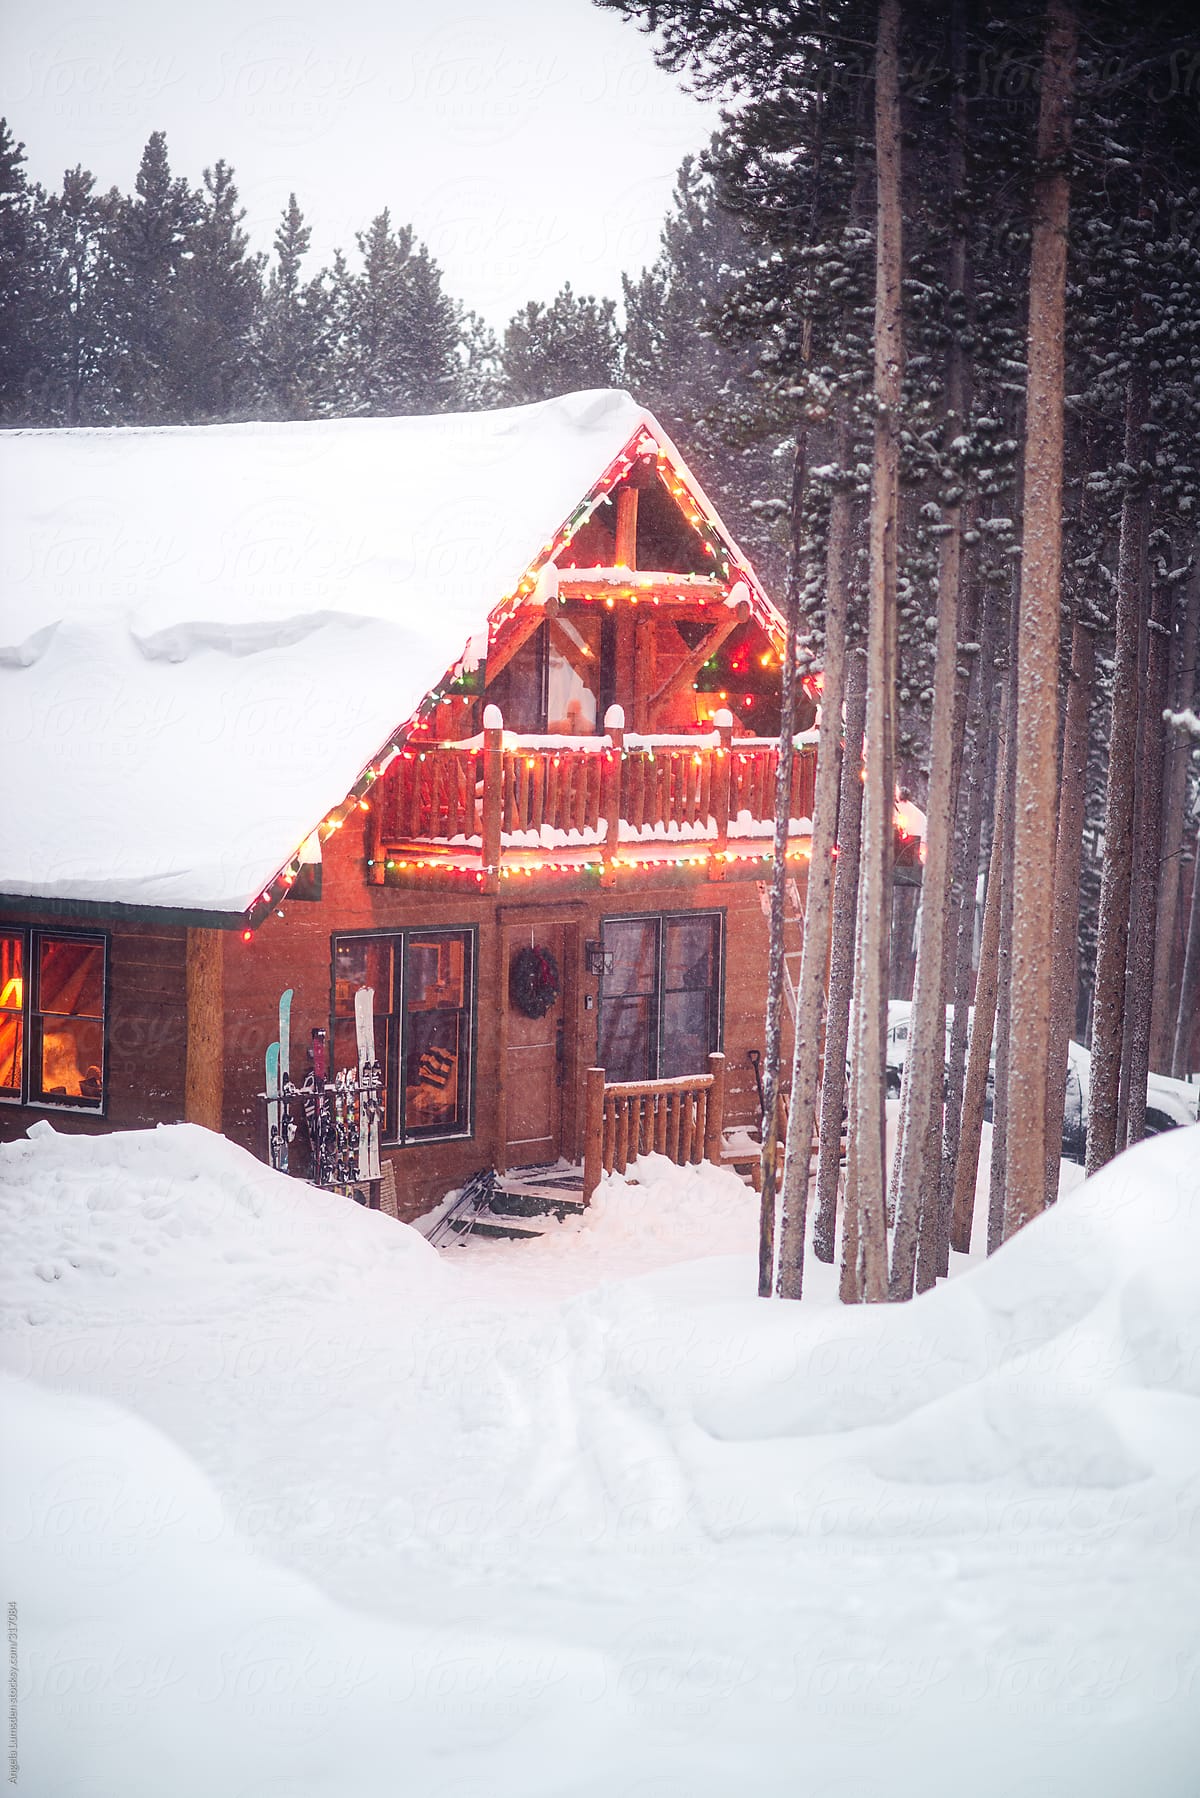 Ski cabin surrounded by deep snow and pine trees